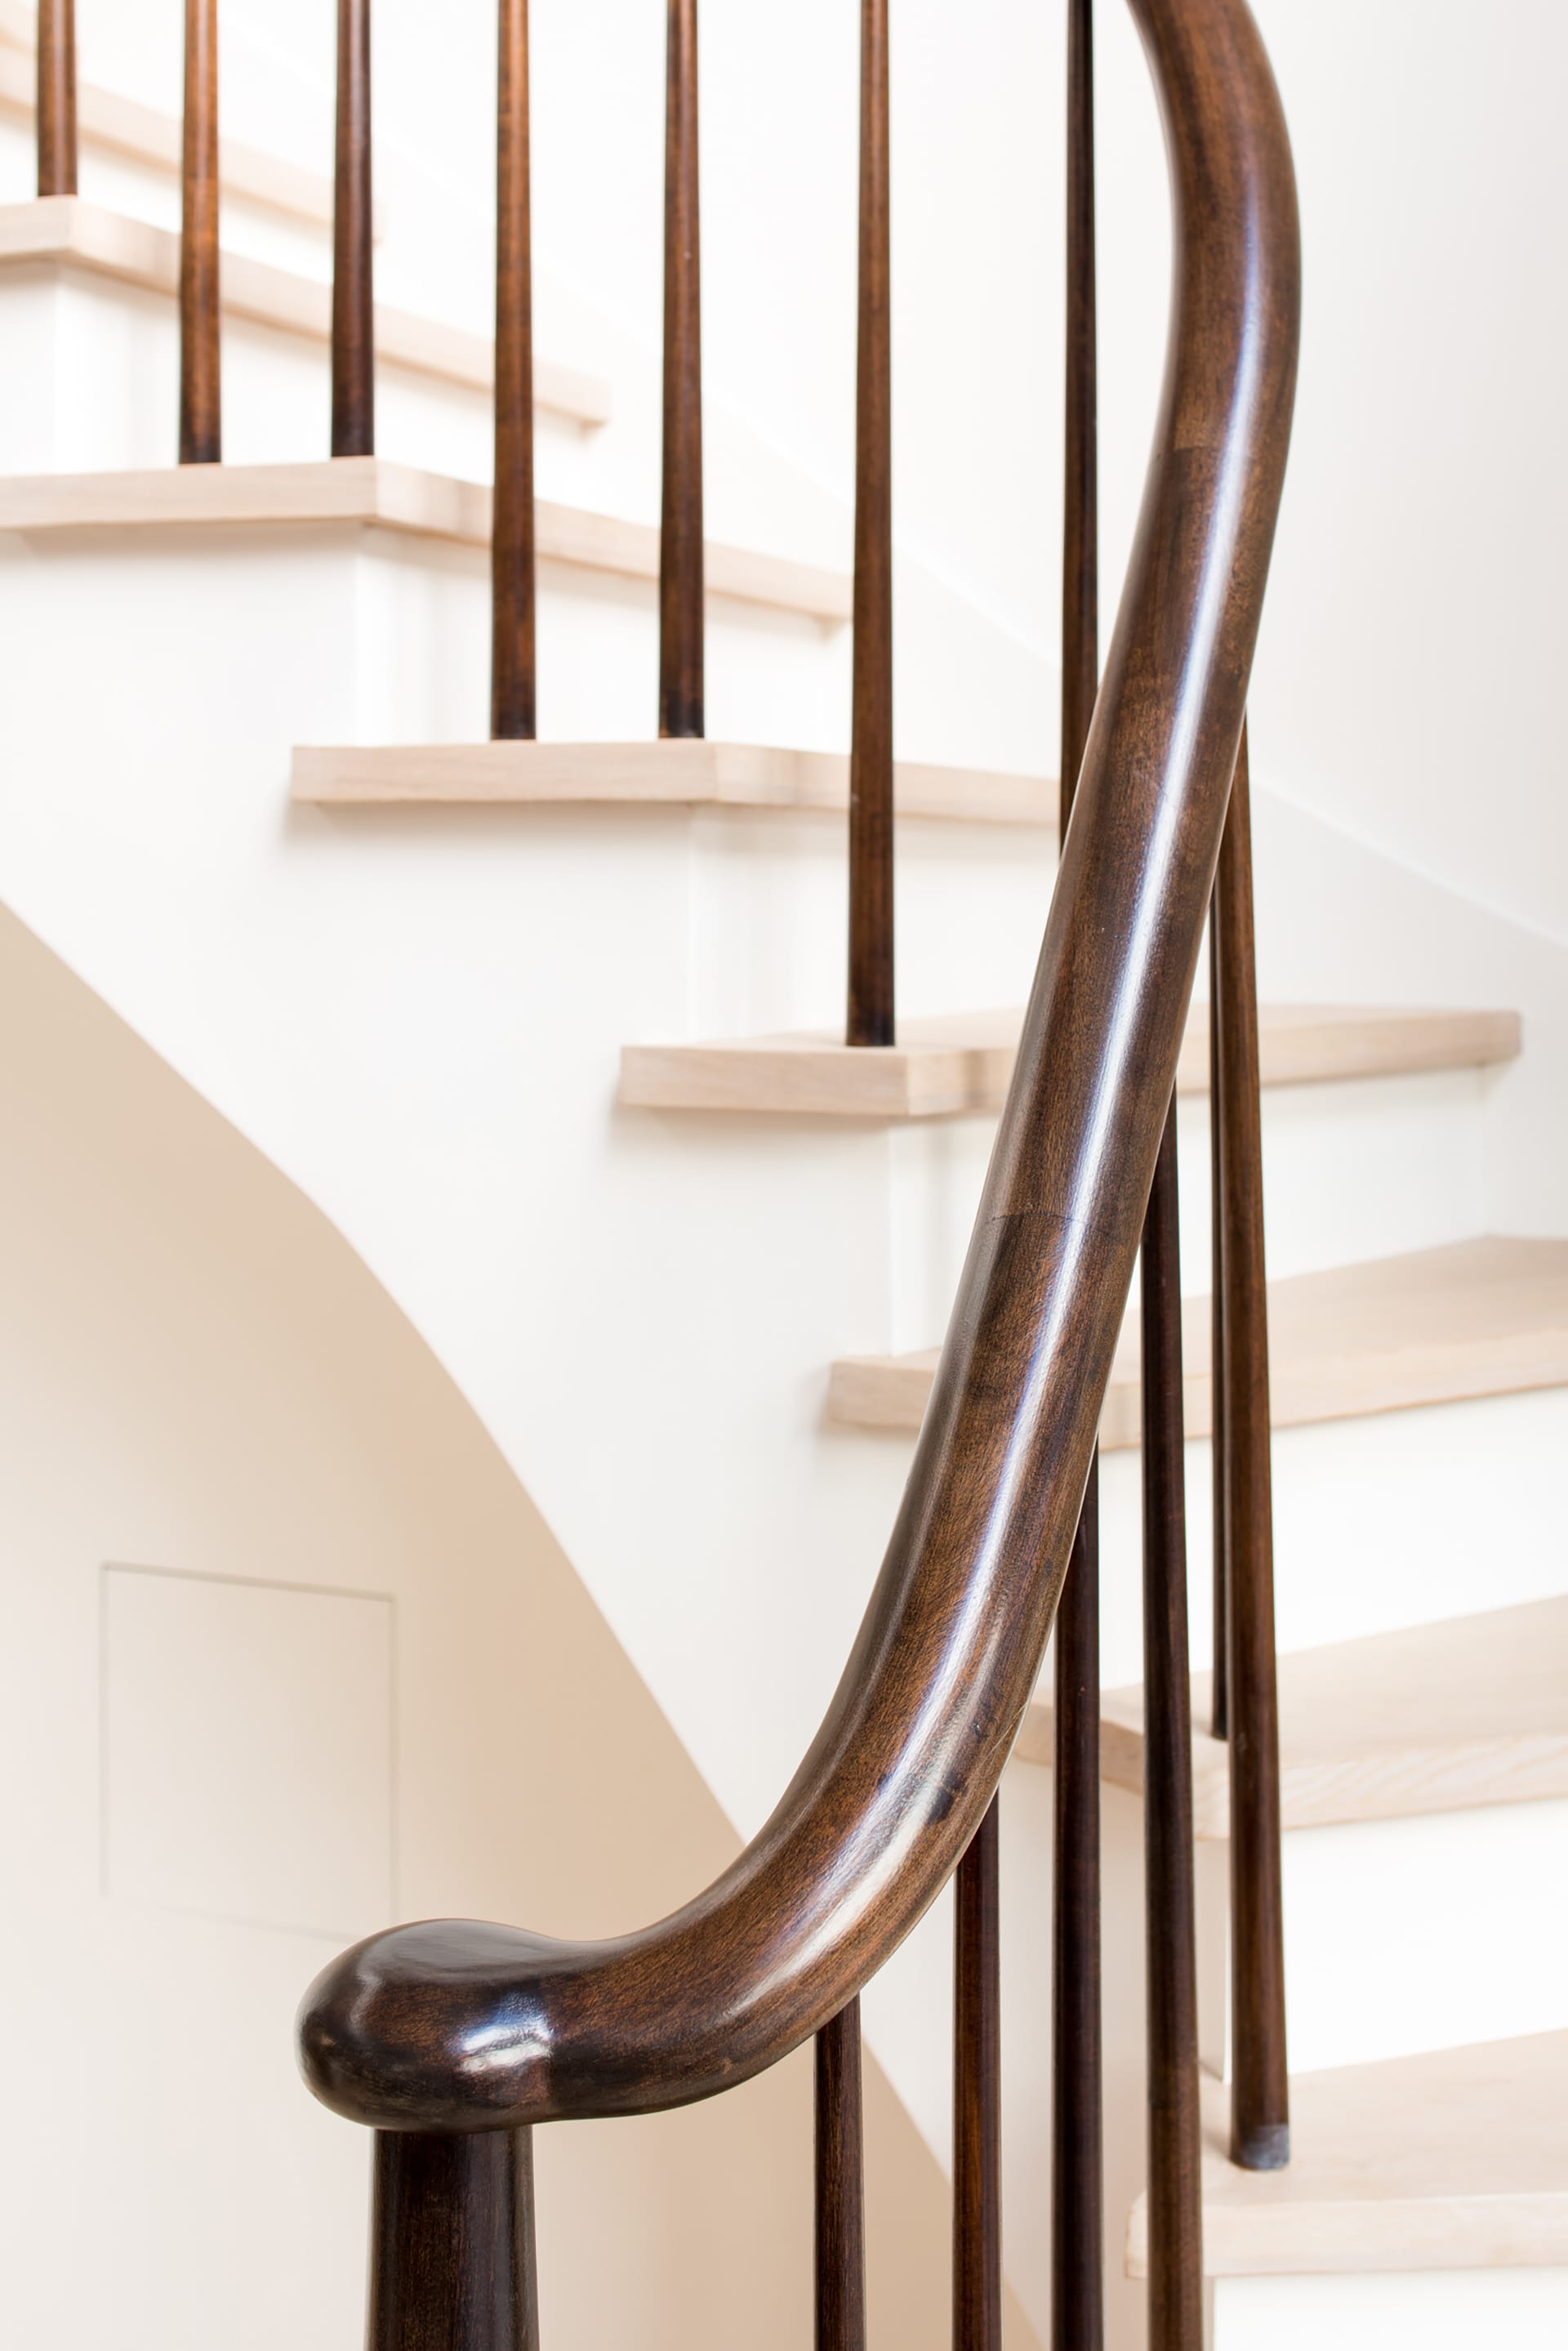 White oak staircase and mahogany handrail and balusters in an Upper West Side Passive House.